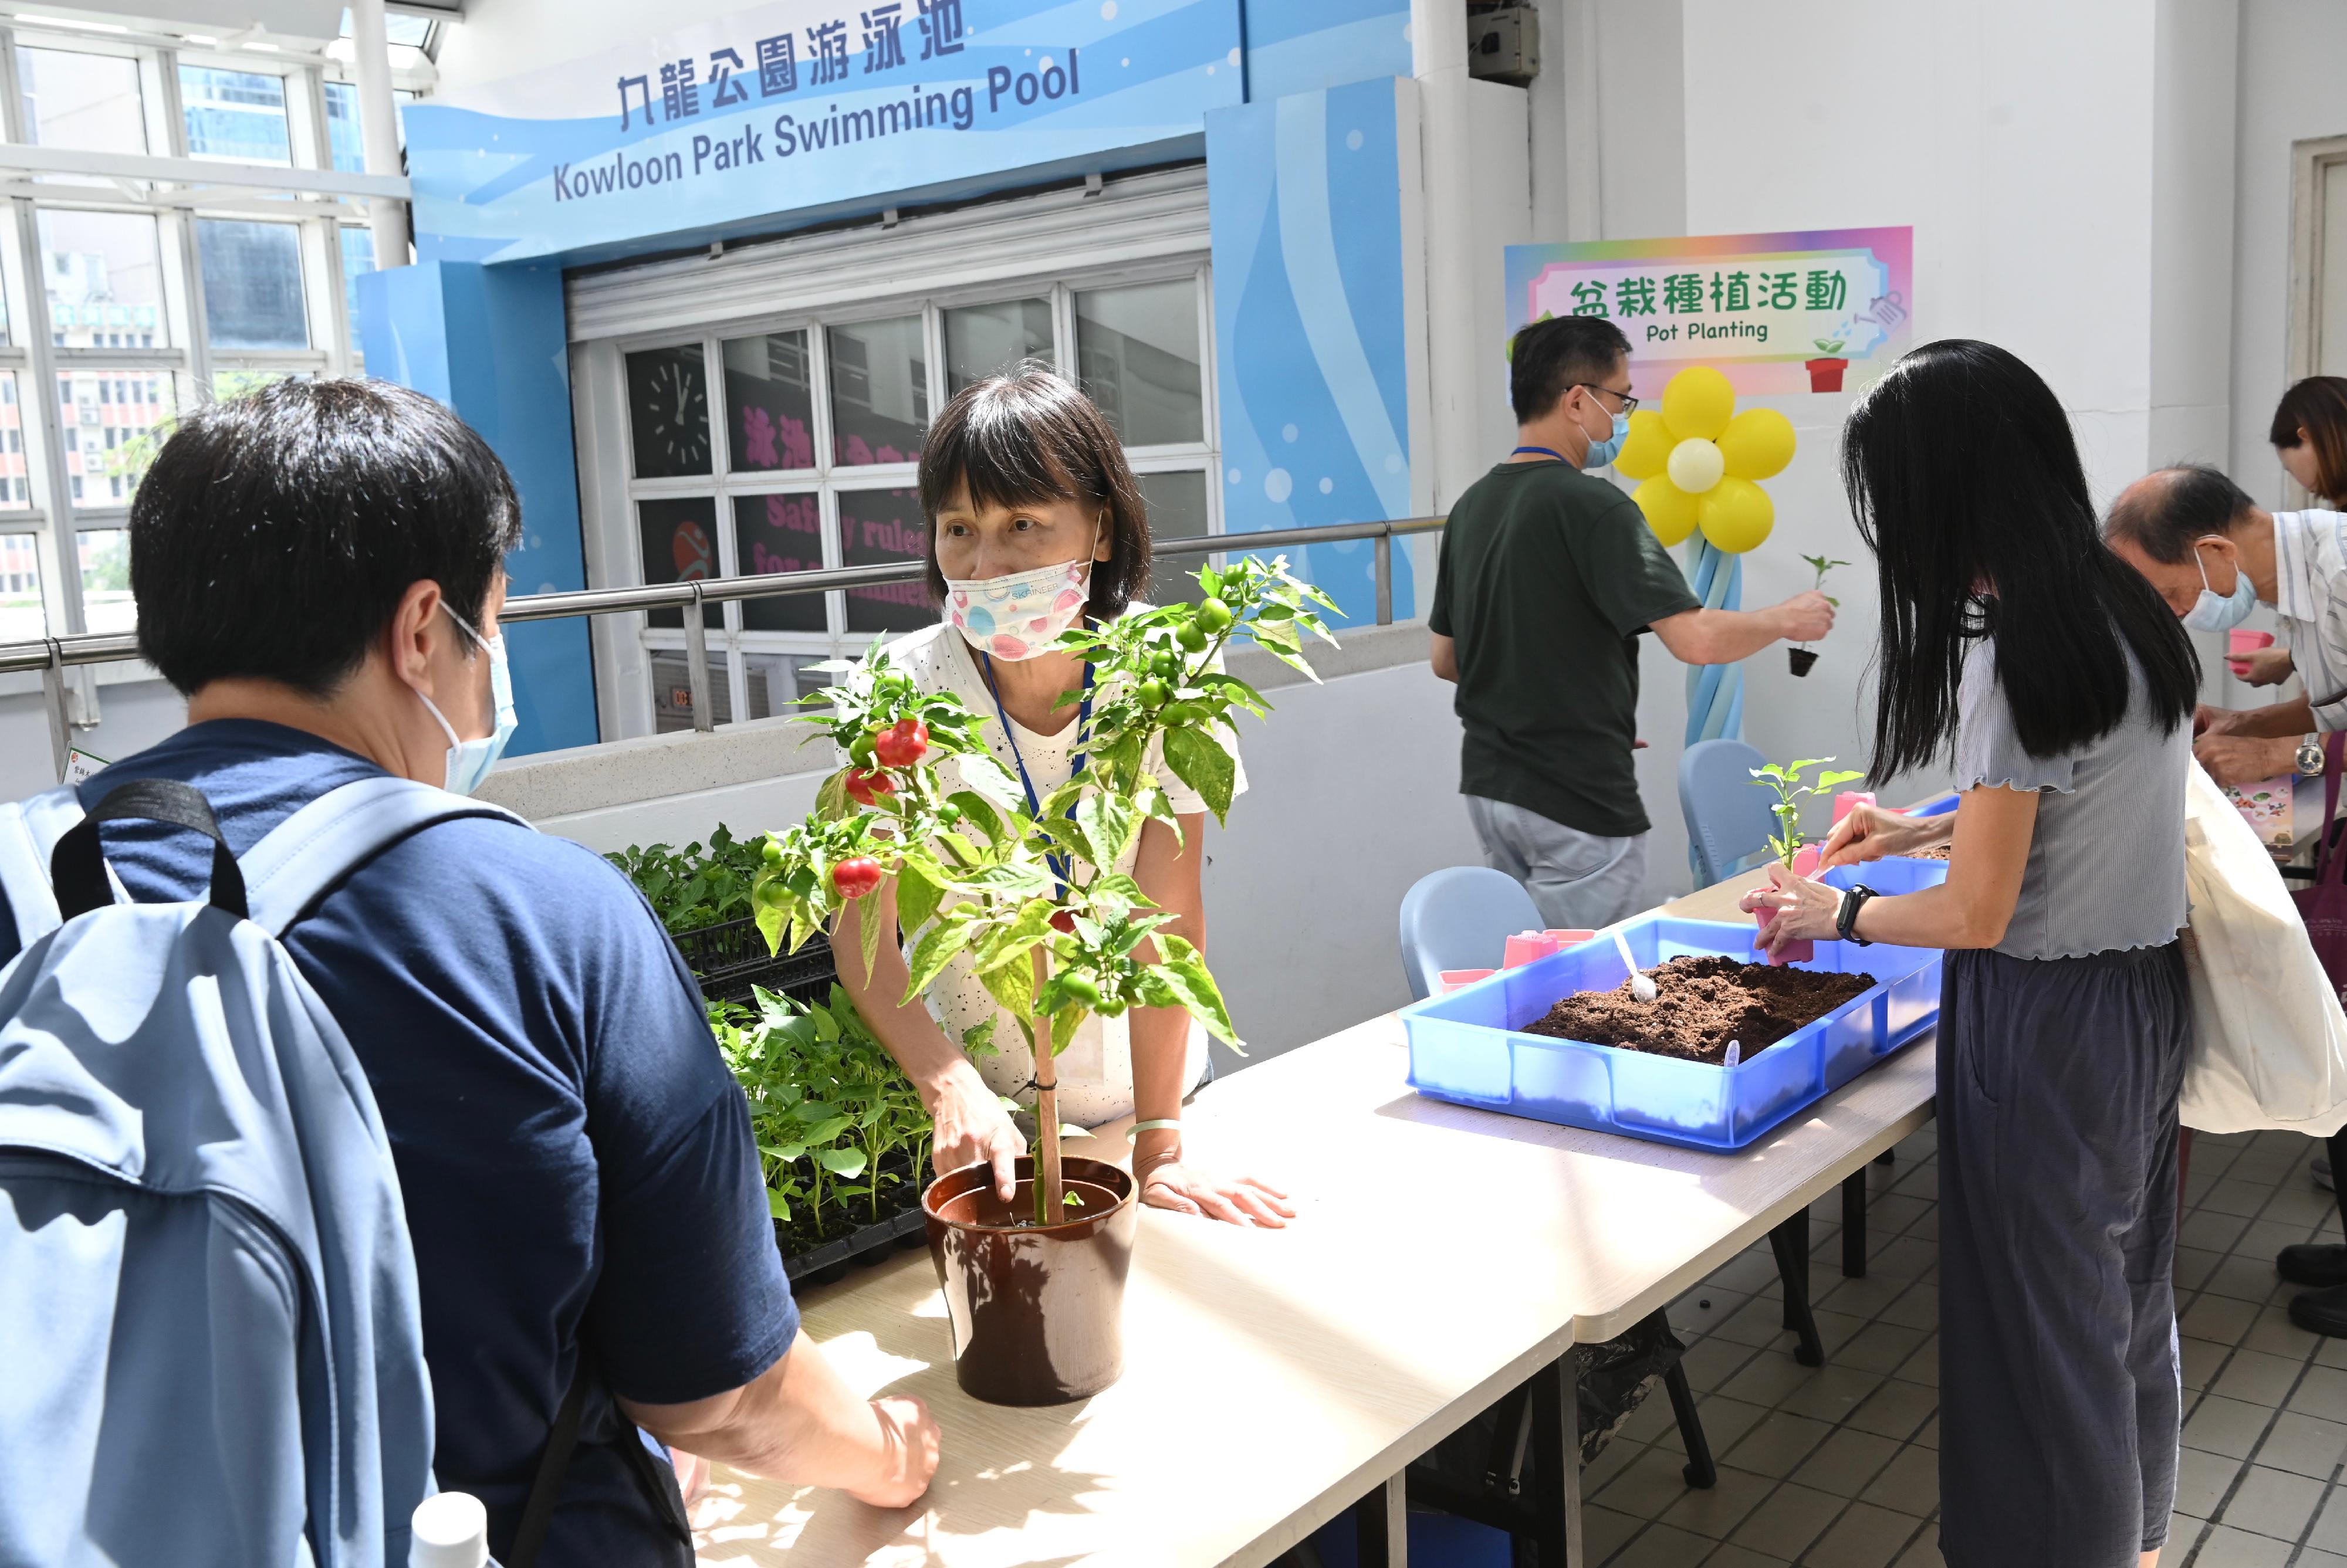 A horticultural education exhibition entitled "Let's learn about edible plants" and related activities are being held by the Leisure and Cultural Services Department today and tomorrow (July 22 and 23) from 10am to 5pm at the Arcade and the Green Education and Resource Centre of Kowloon Park. Admission is free. Photo shows members of the public participating in potted plant activities.
